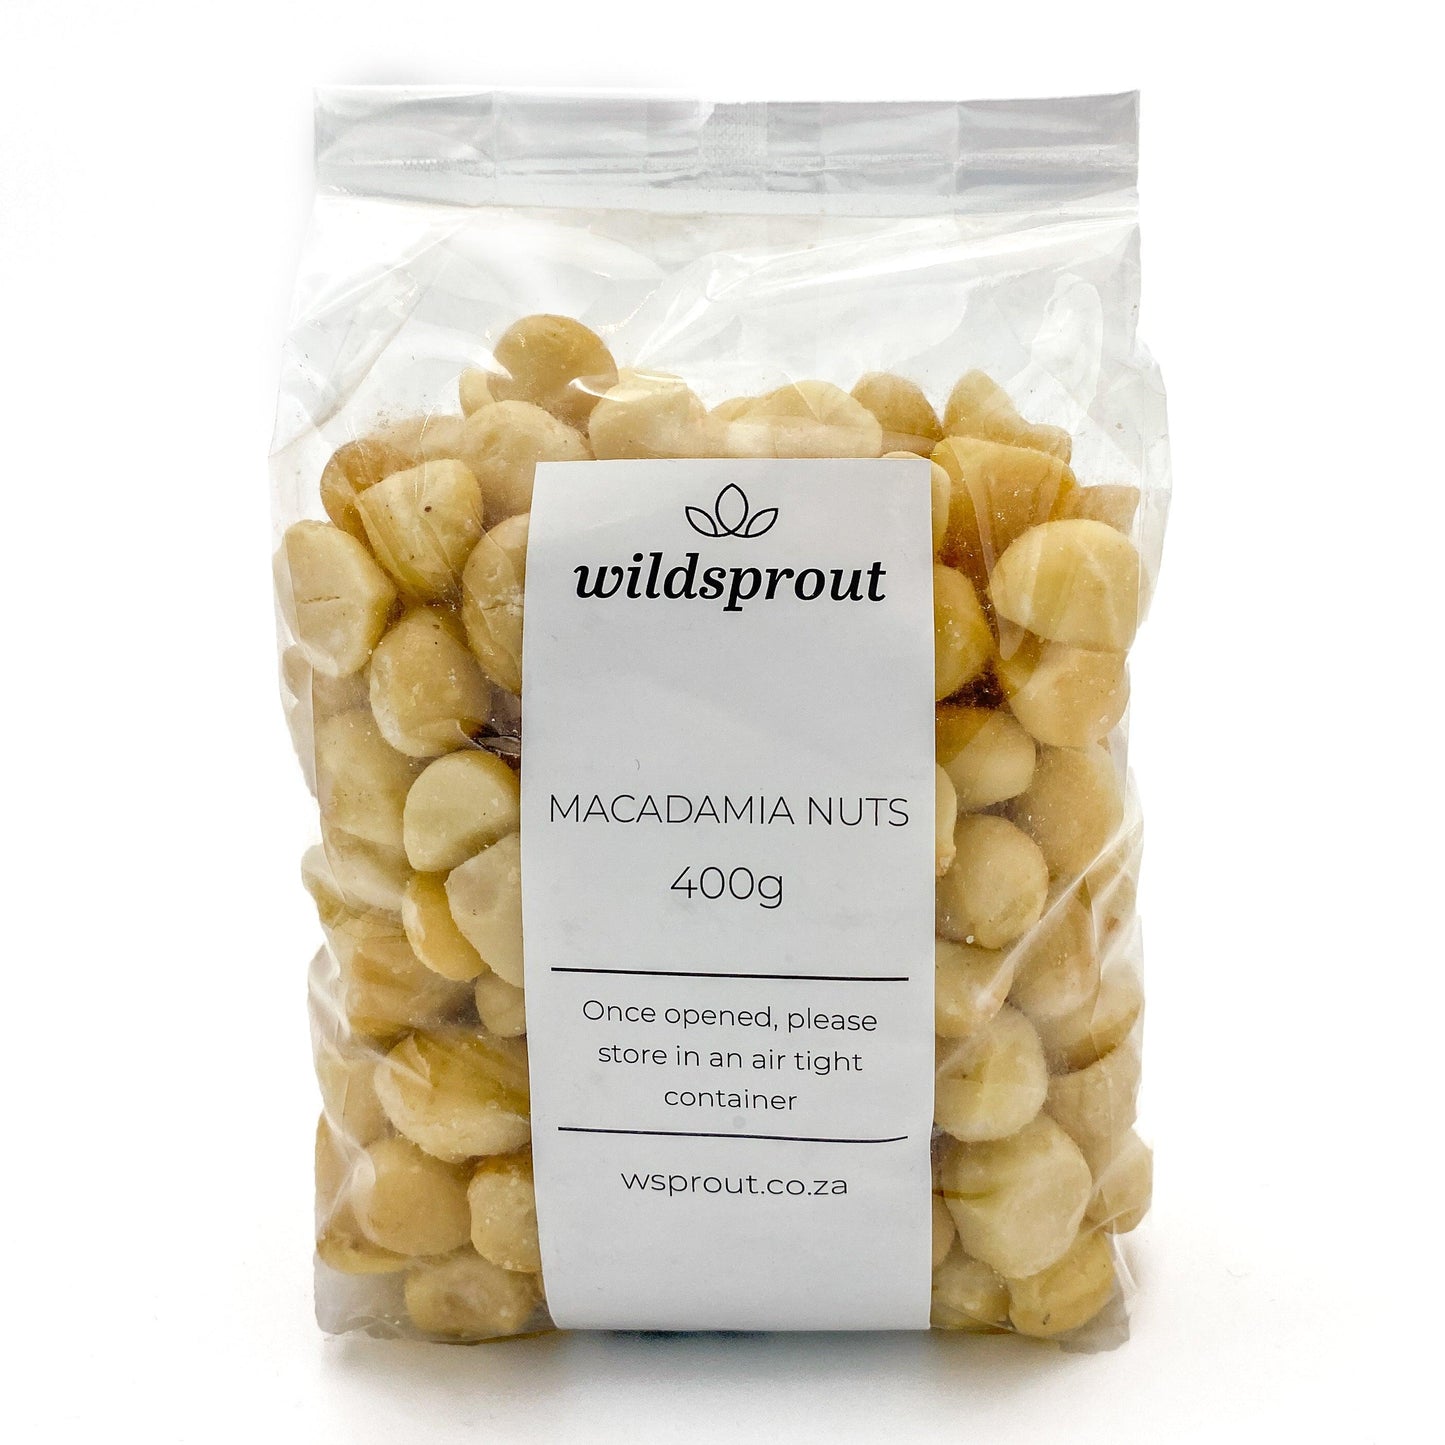 Macadamia Nuts 400g - Wildsprout